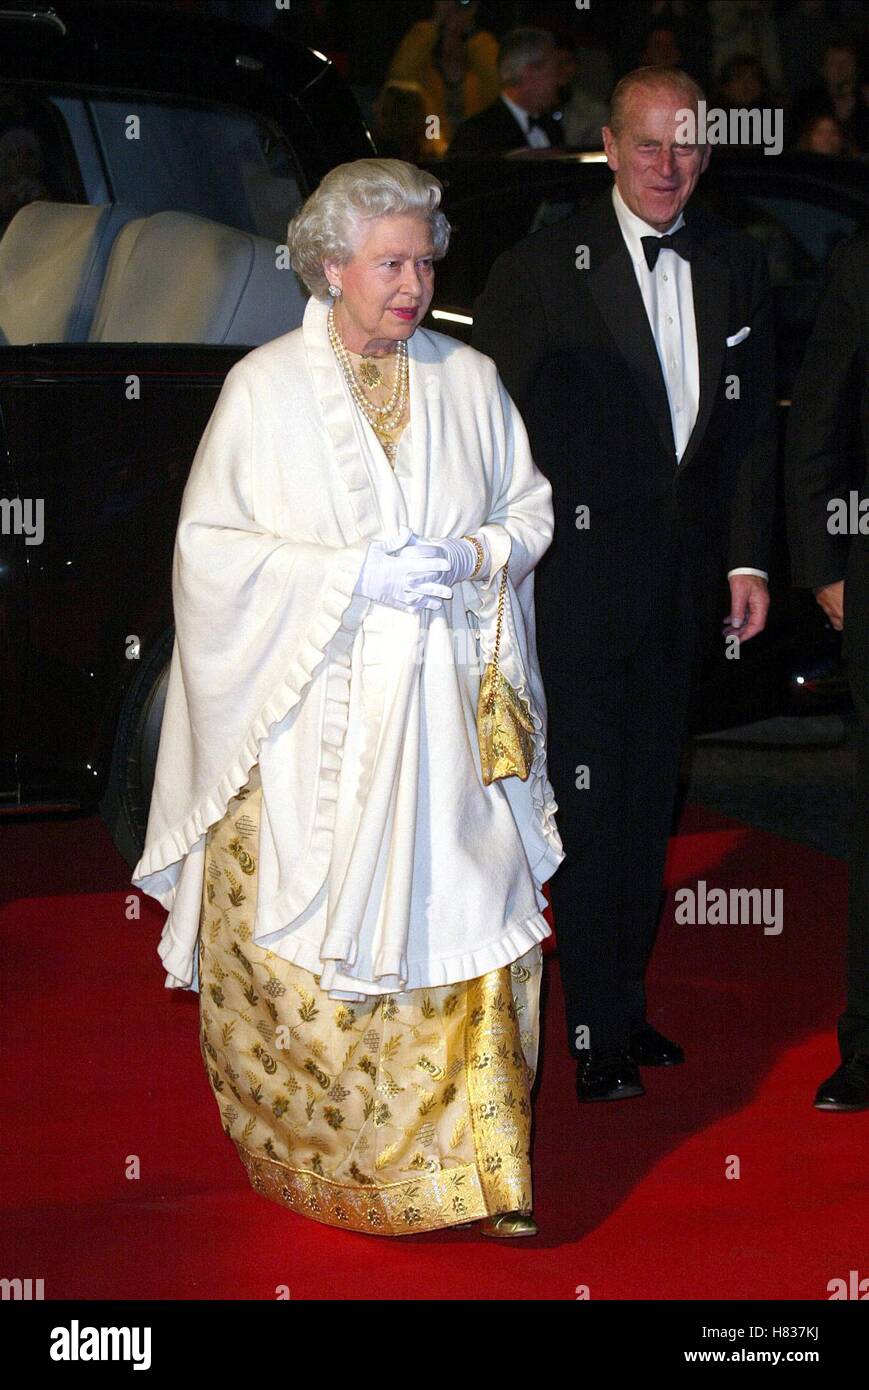 HER MAJESTY QUEEN ELIZABETH II DIE ANOTHER DAY (JAMES BOND) PREMIERE LONDON ROYAL ALBERT HALL LONDON ENGLAND 18 November 200 Stock Photo